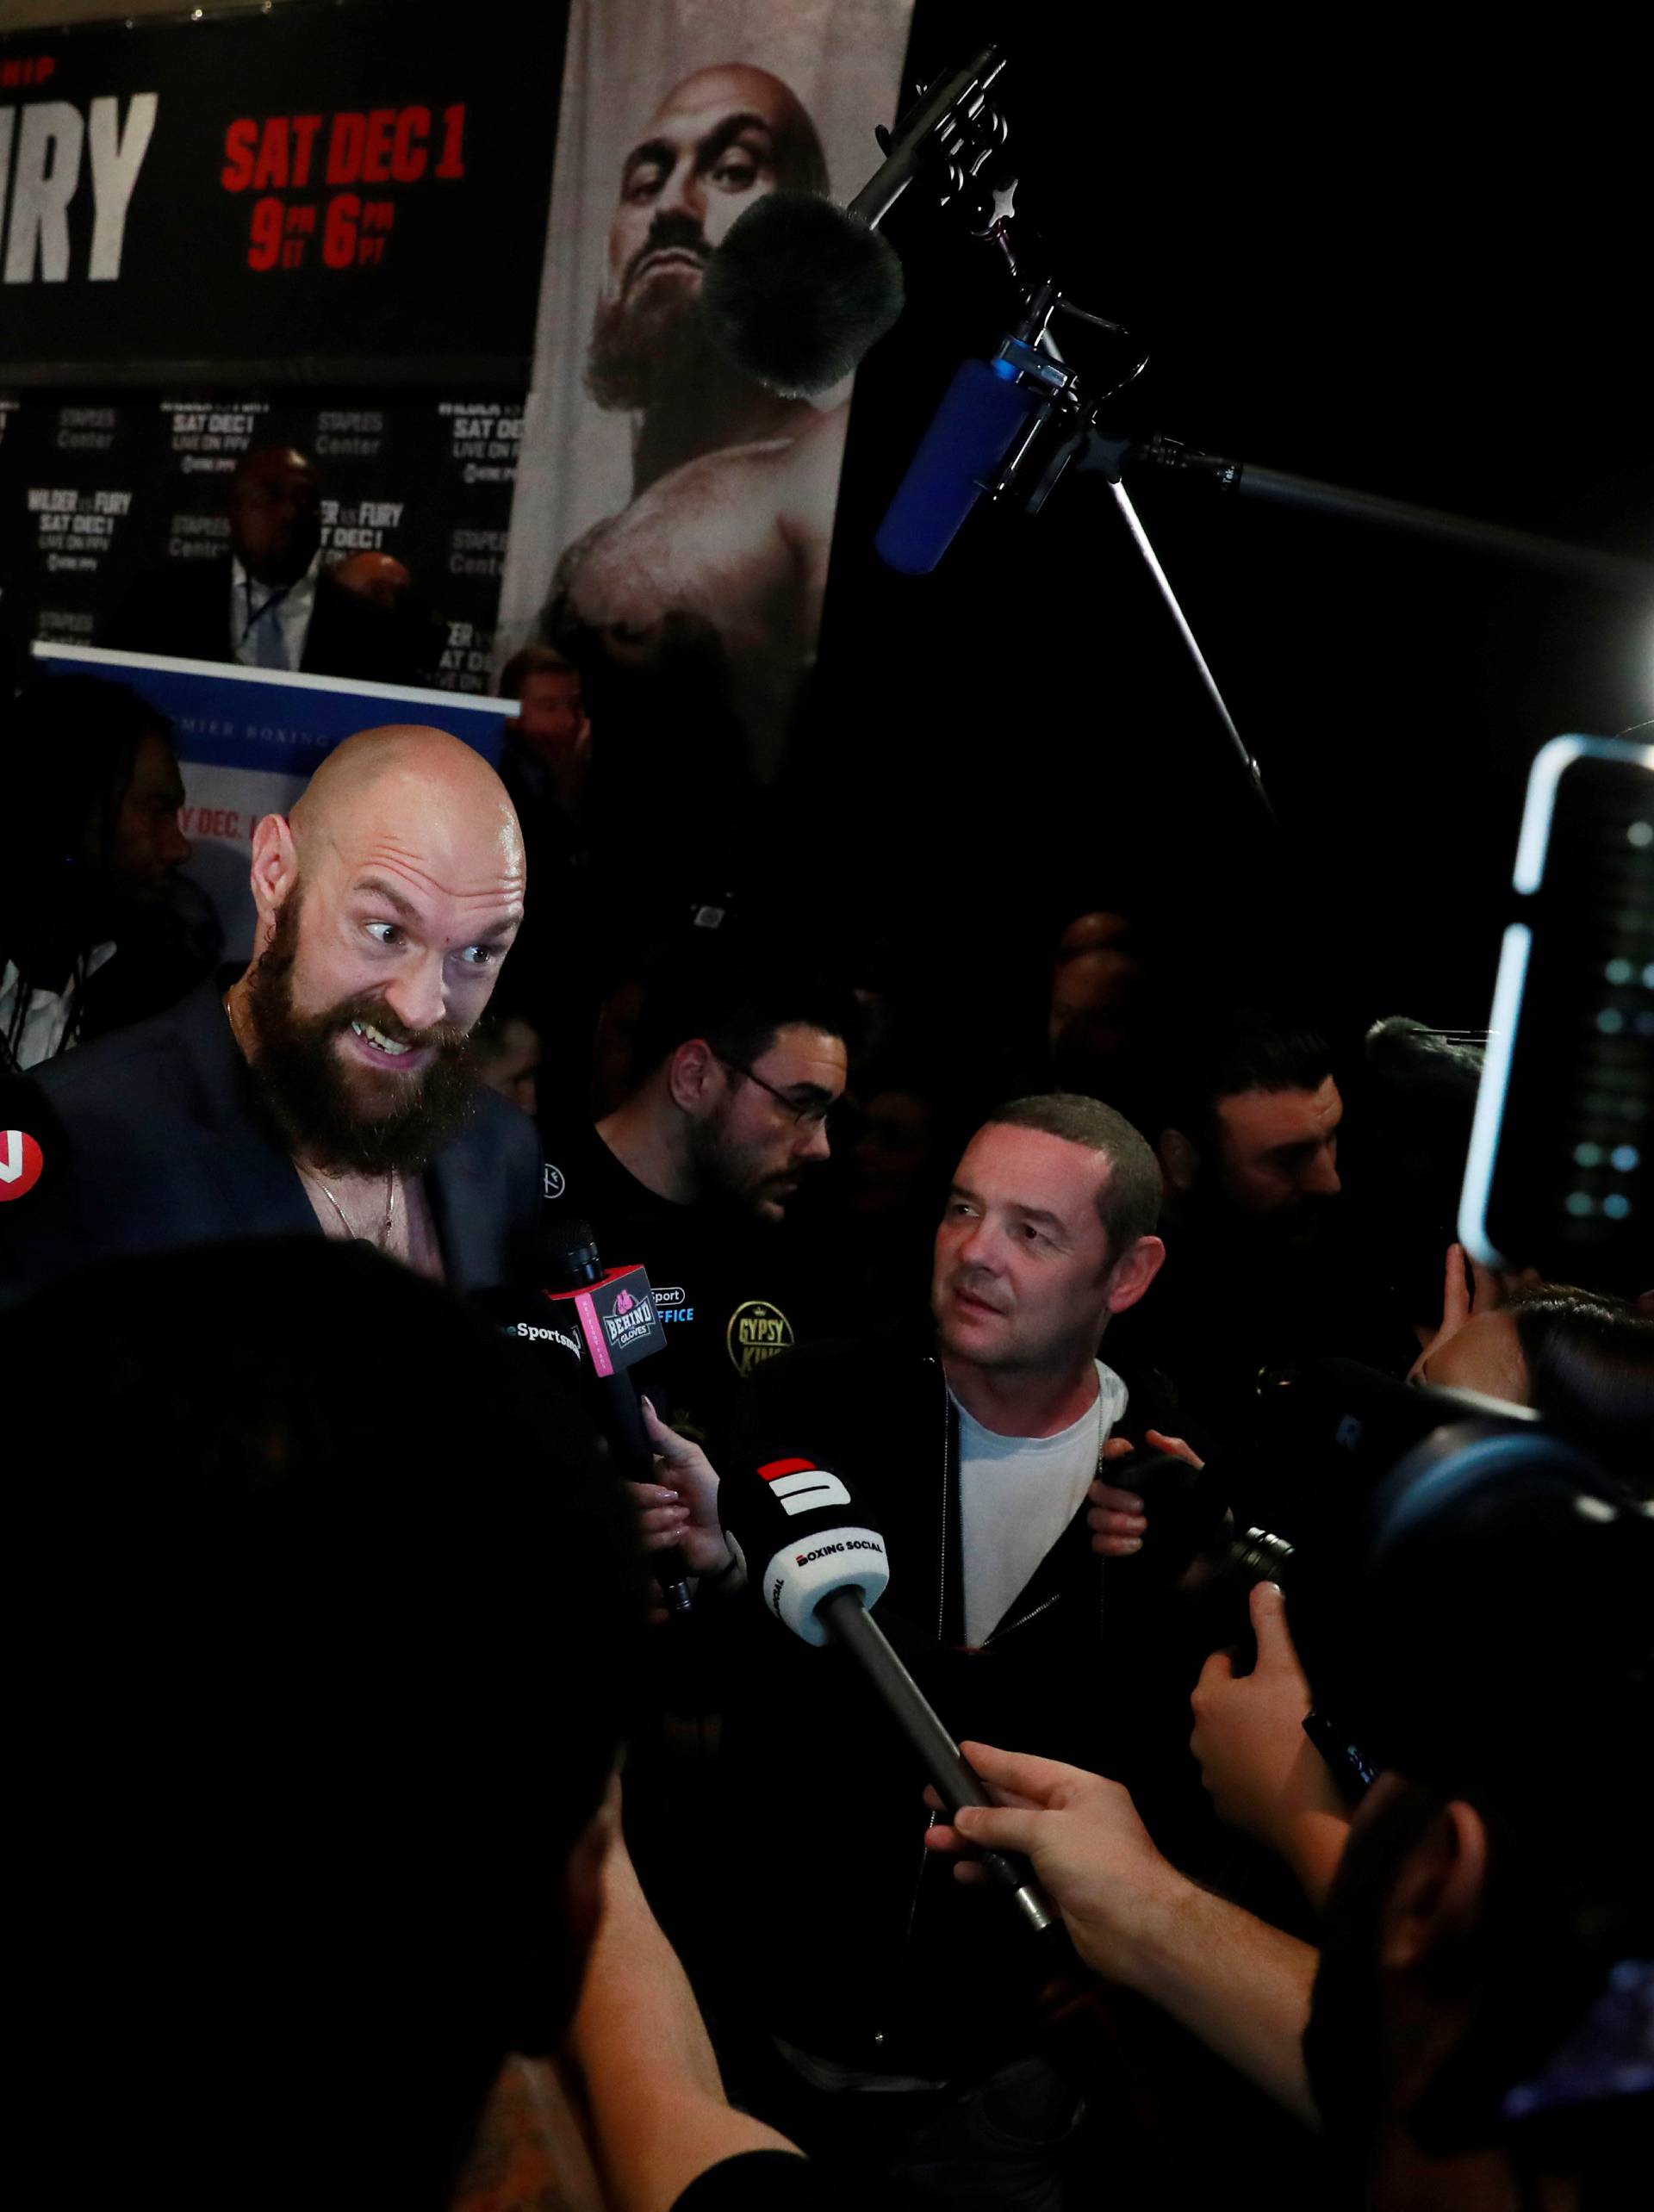 Deontay Wilder & Tyson Fury Press Conference